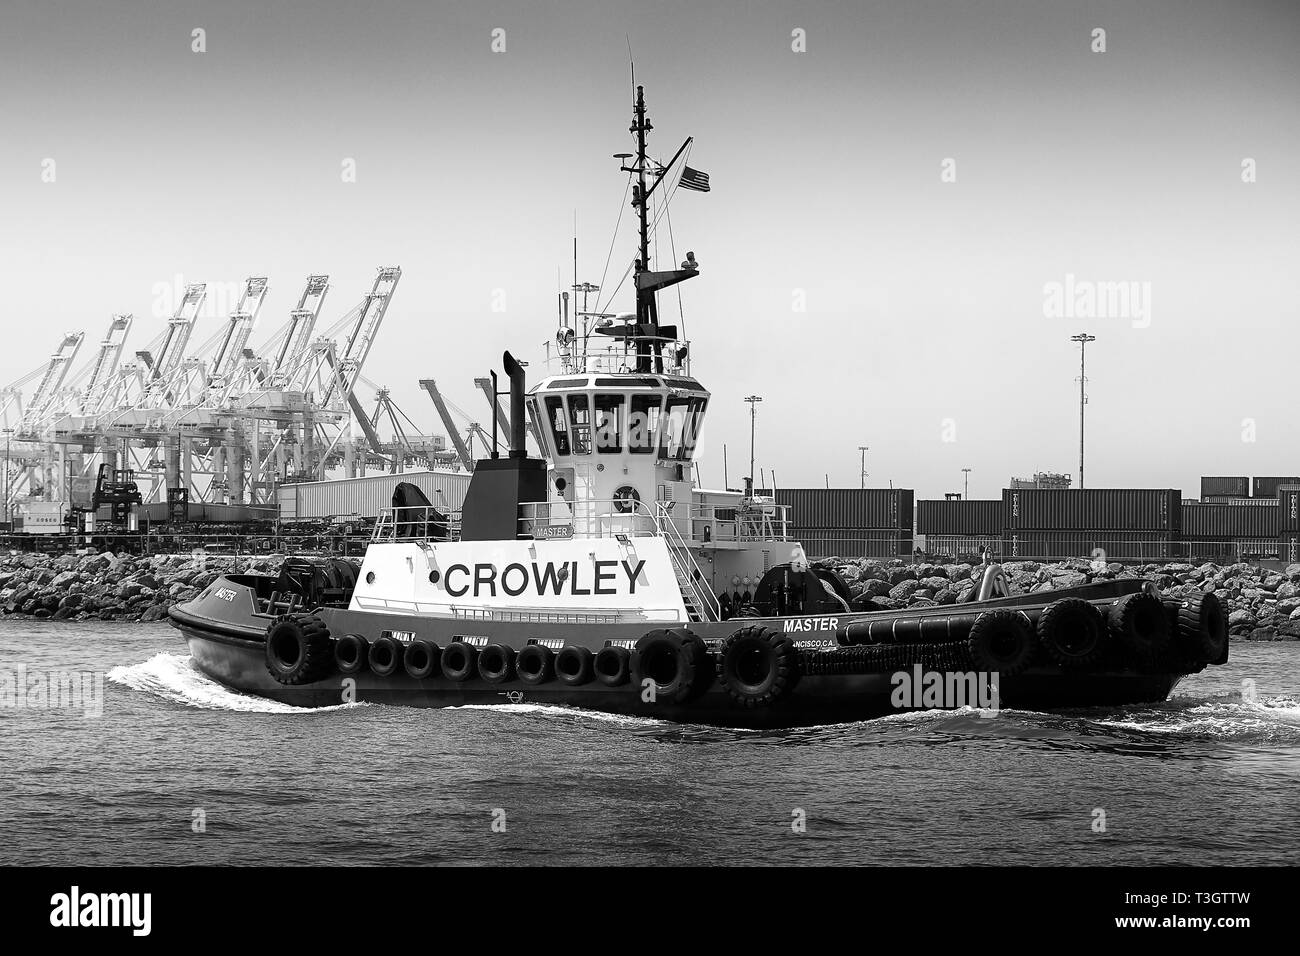 Black And White Photo Of The Crowley Maritime Tractor Tug, MASTER, Underway In The Port Of Long Beach, California, USA. Stock Photo